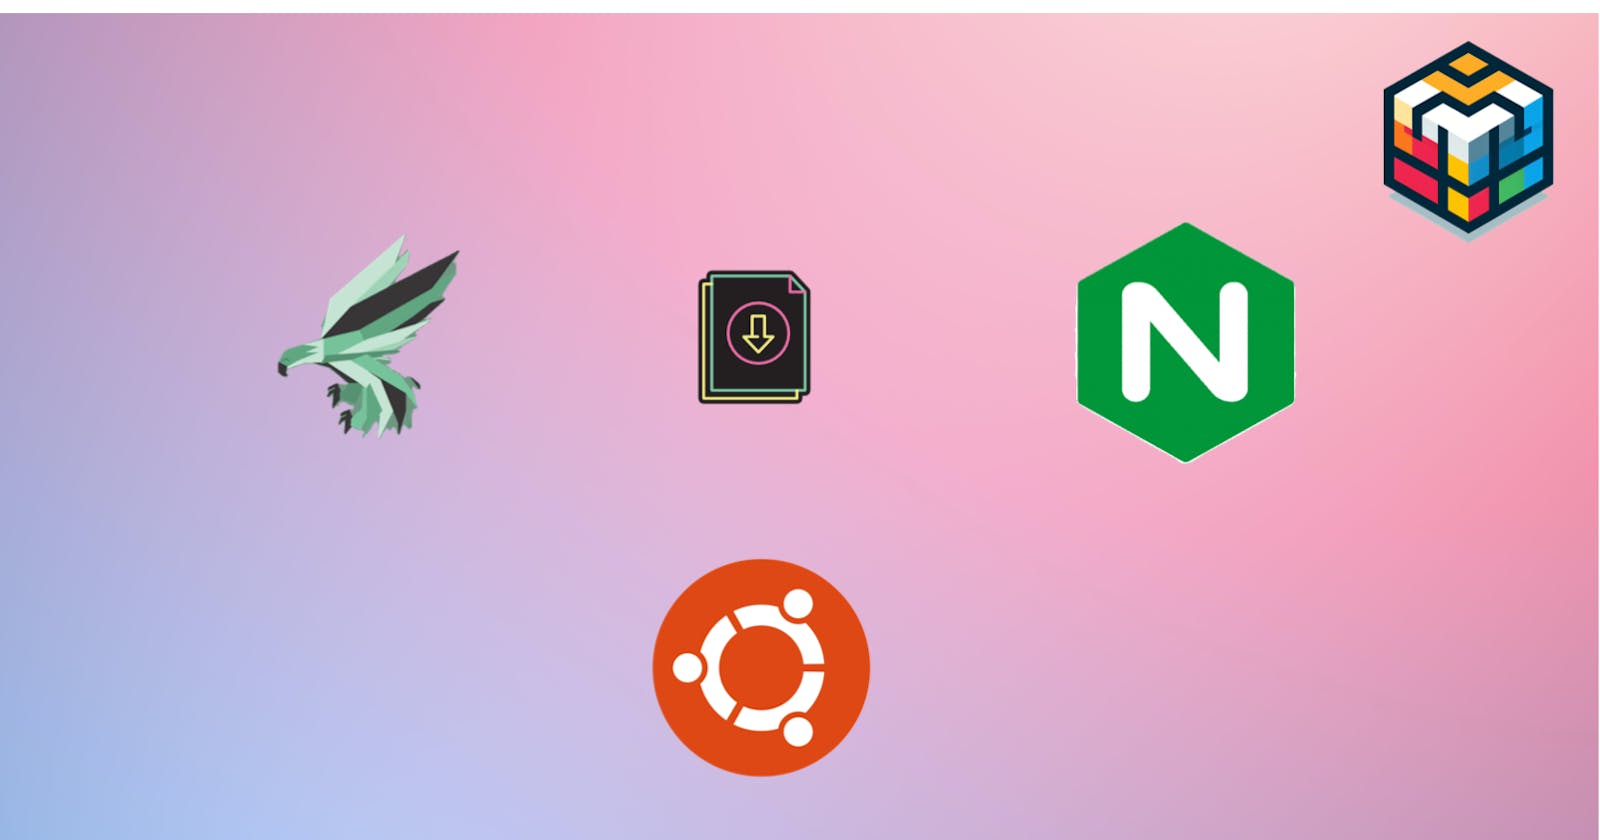 How To Configure Phalcon in Nginx Server on Ubuntu 20.04 - Complete Guide